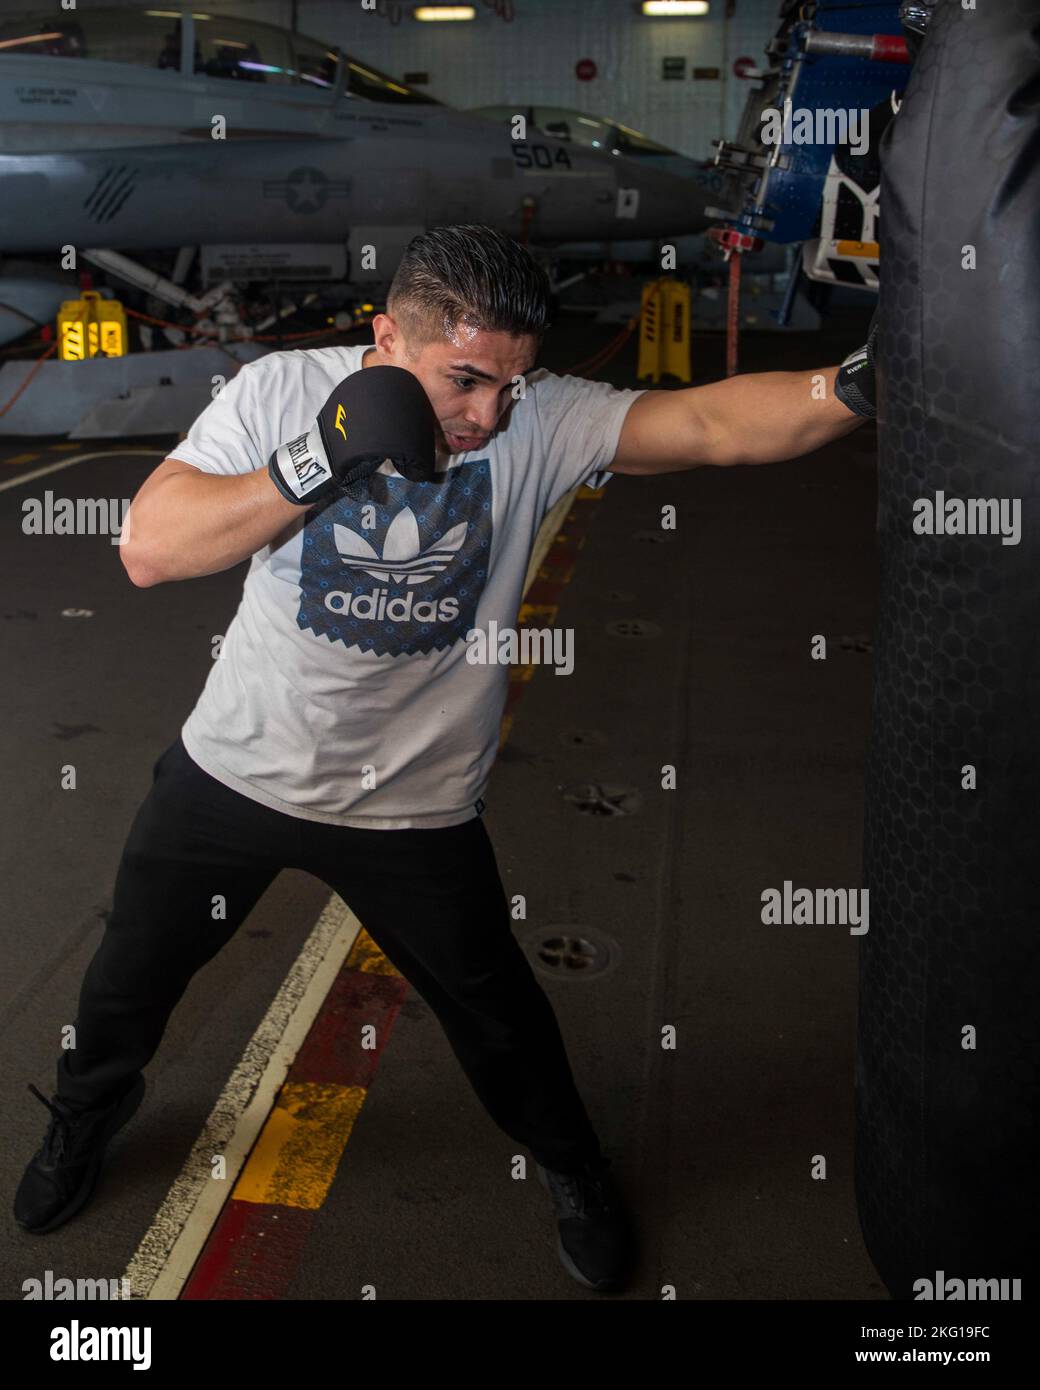 Aviation Structural Mechanic 3rd Class Luis Calderon, from Fort Worth, Texas, assigned to the “Golden Warriors” of Strike Fighter Squadron (VFA) 87, punches a punching bag in the first-in-class aircraft carrier USS Gerald R. Ford's (CVN 78) hangar bay, Oct. 21, 2022. The Gerald R. Ford Carrier Strike Group (GRFCSG) is deployed in the Atlantic Ocean, conducting training and operations alongside NATO Allies and partners to enhance integration for future operations and demonstrate the U.S. Navy’s commitment to a peaceful, stable and conflict-free Atlantic region. Stock Photo